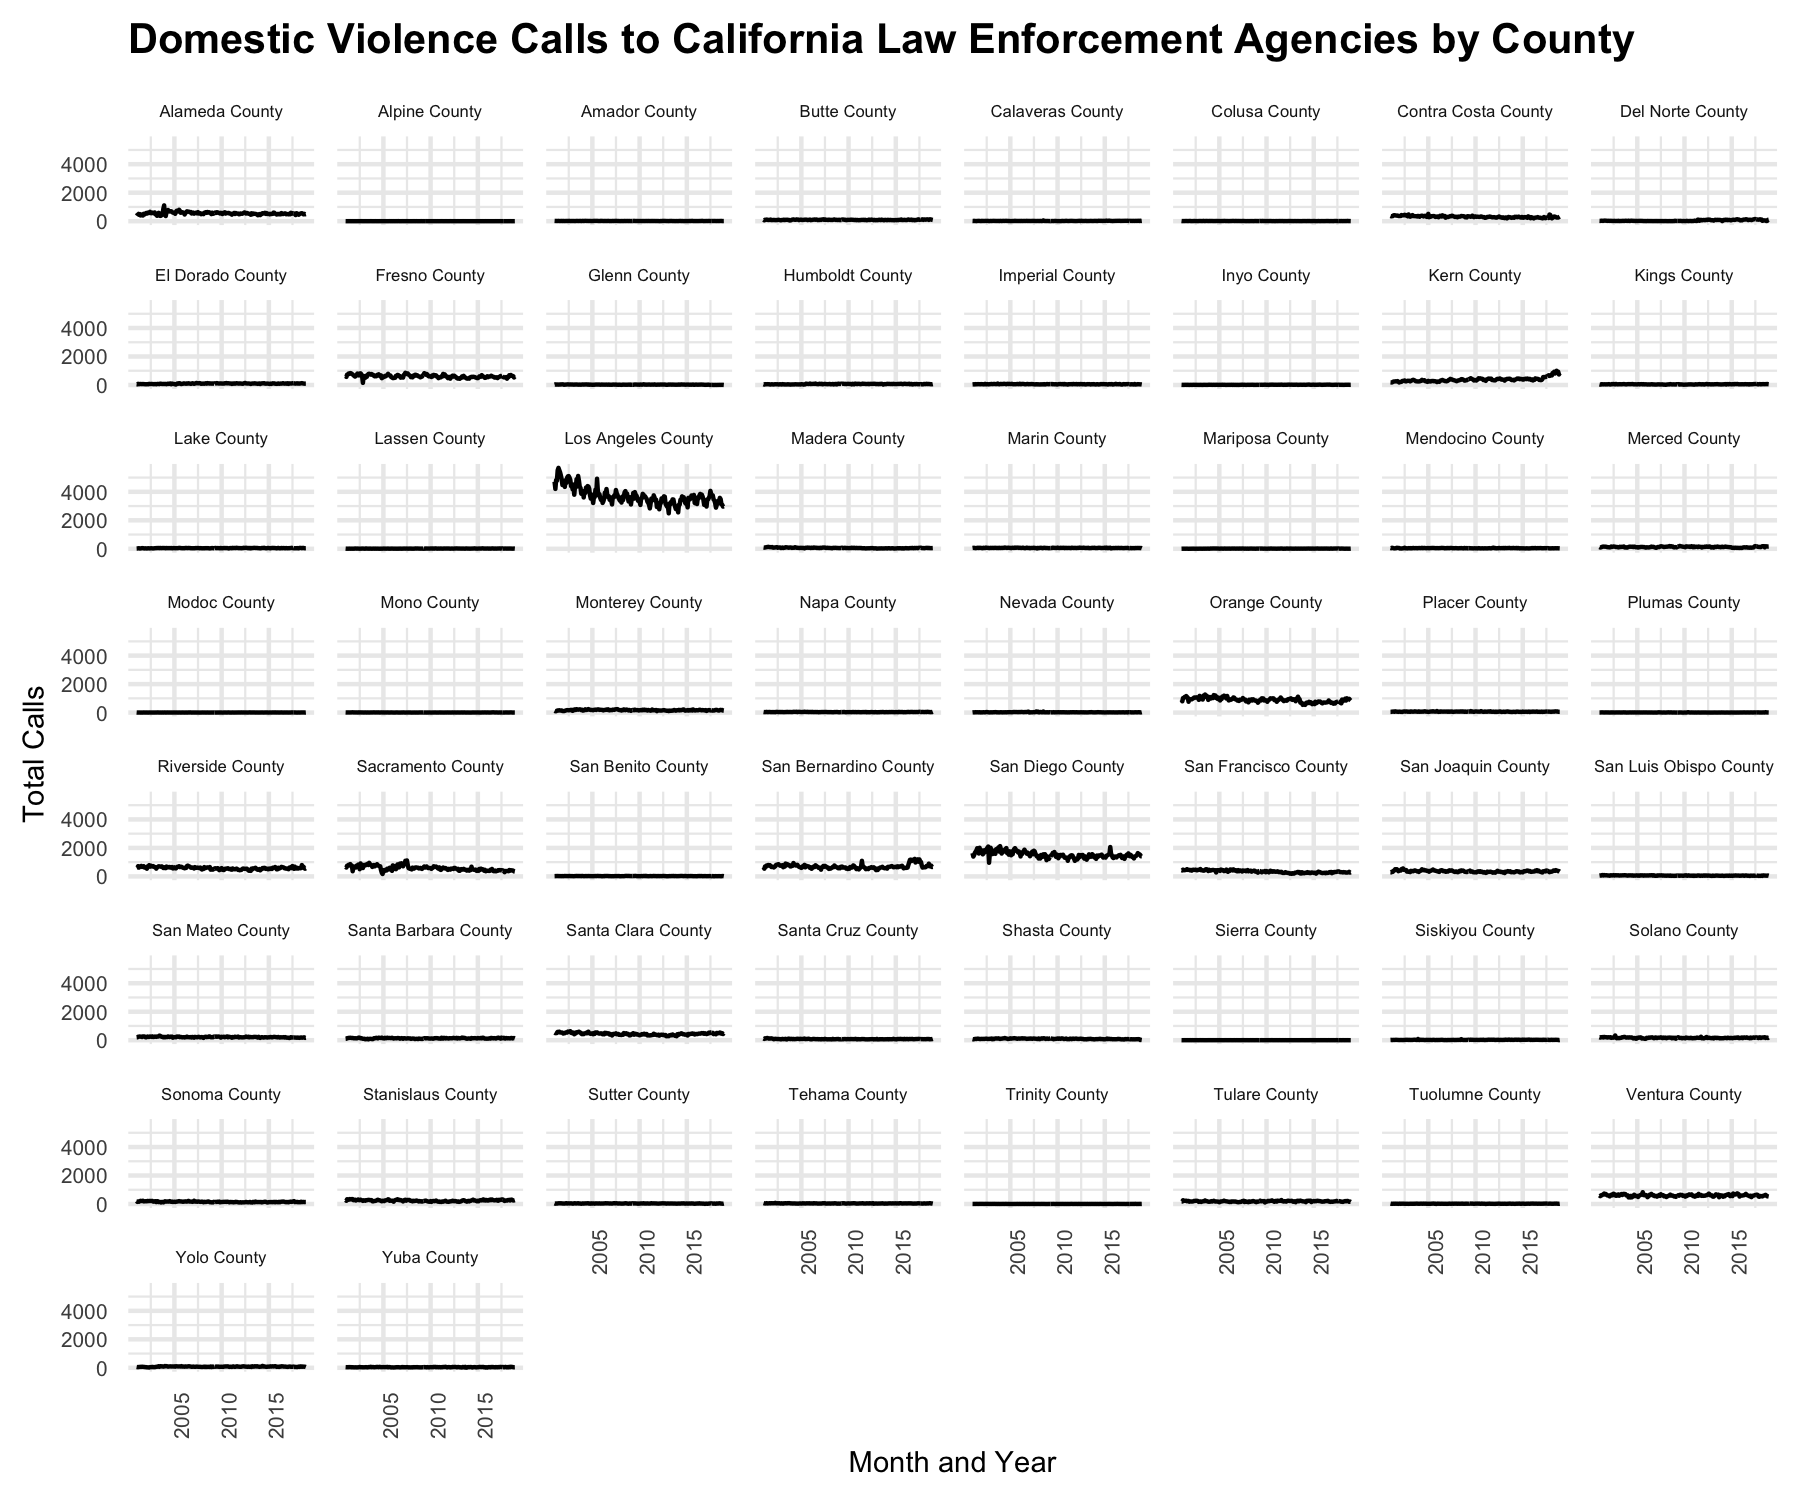 Figure 7: R output when student plots the total domestic violence calls to California law enforcement agencies over time divided by county. 